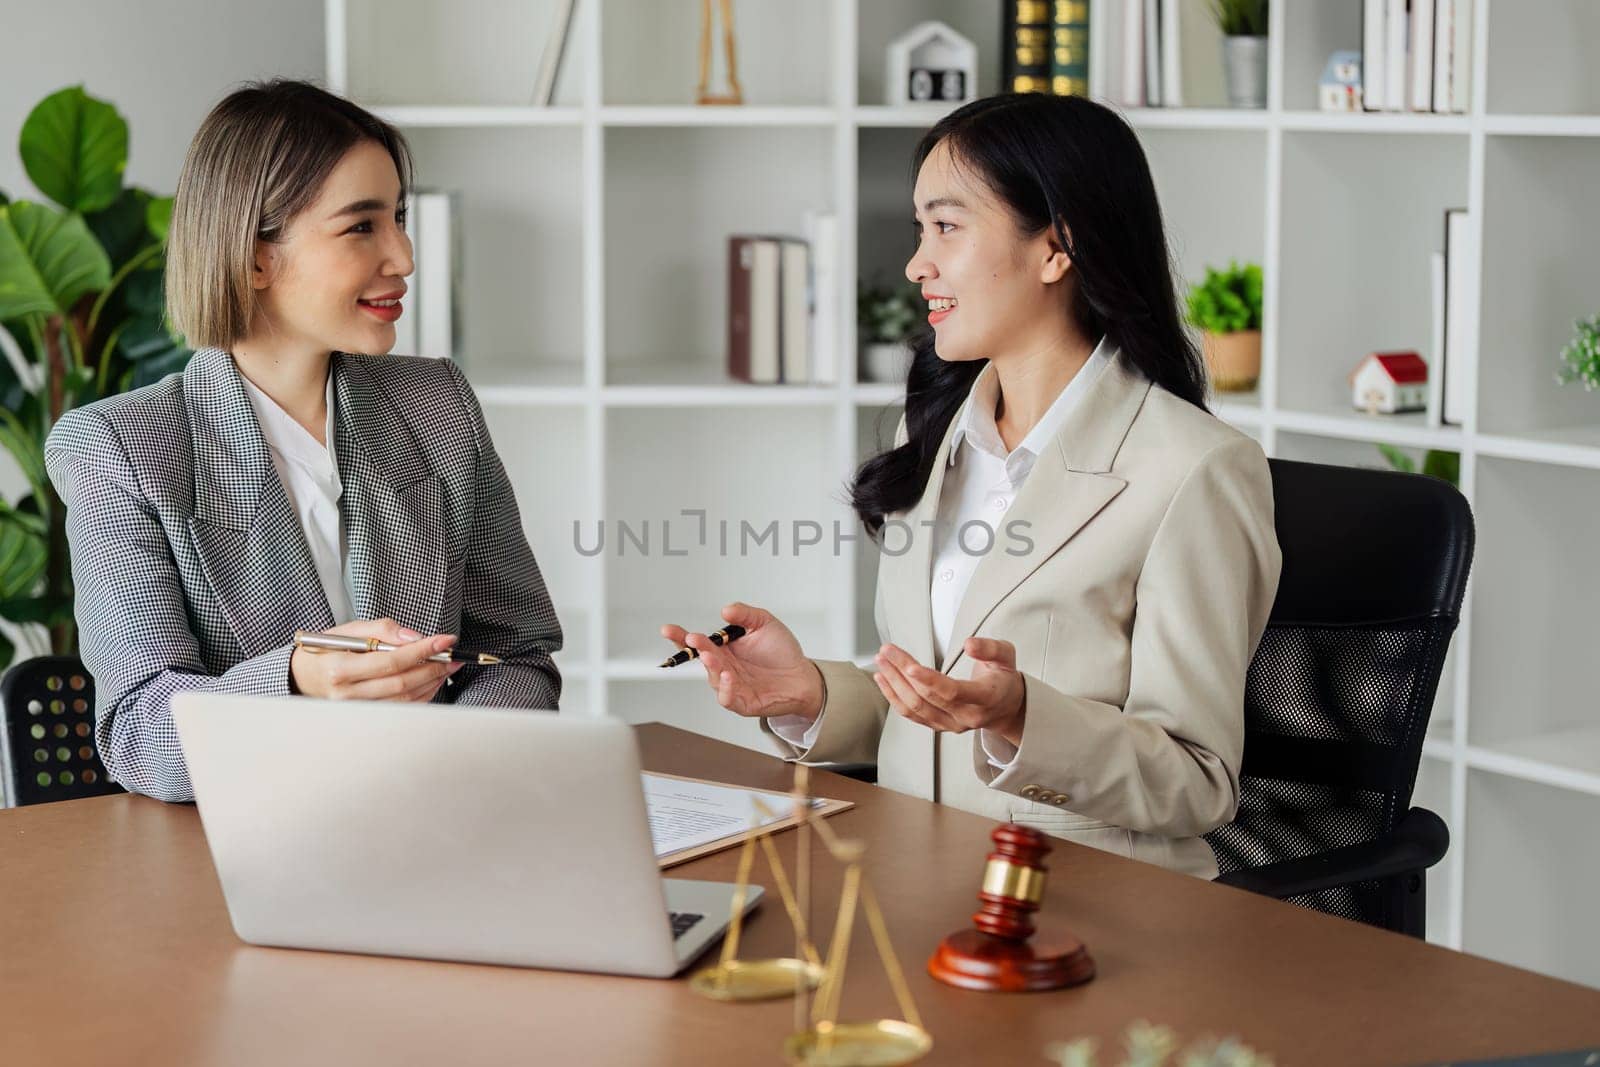 Lawyer working with client discussing contract document in office, consulting to help customer by itchaznong